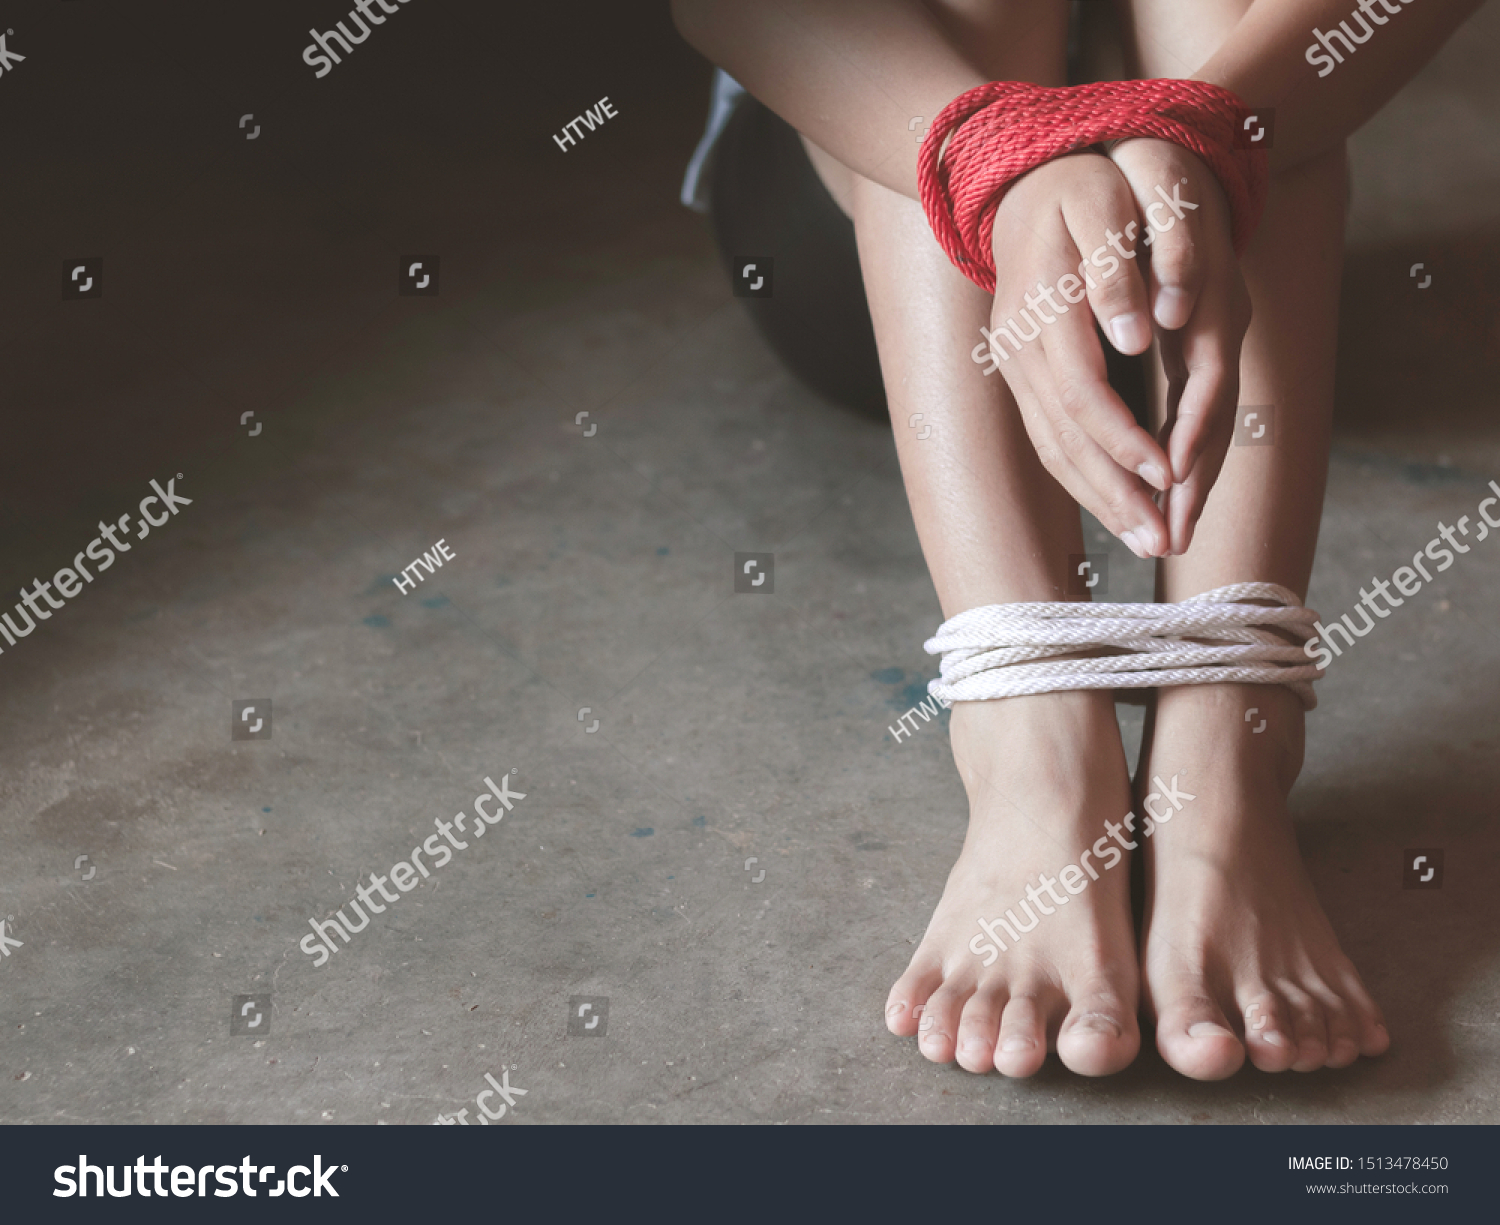 Young Girls Kidnapped Tied Up